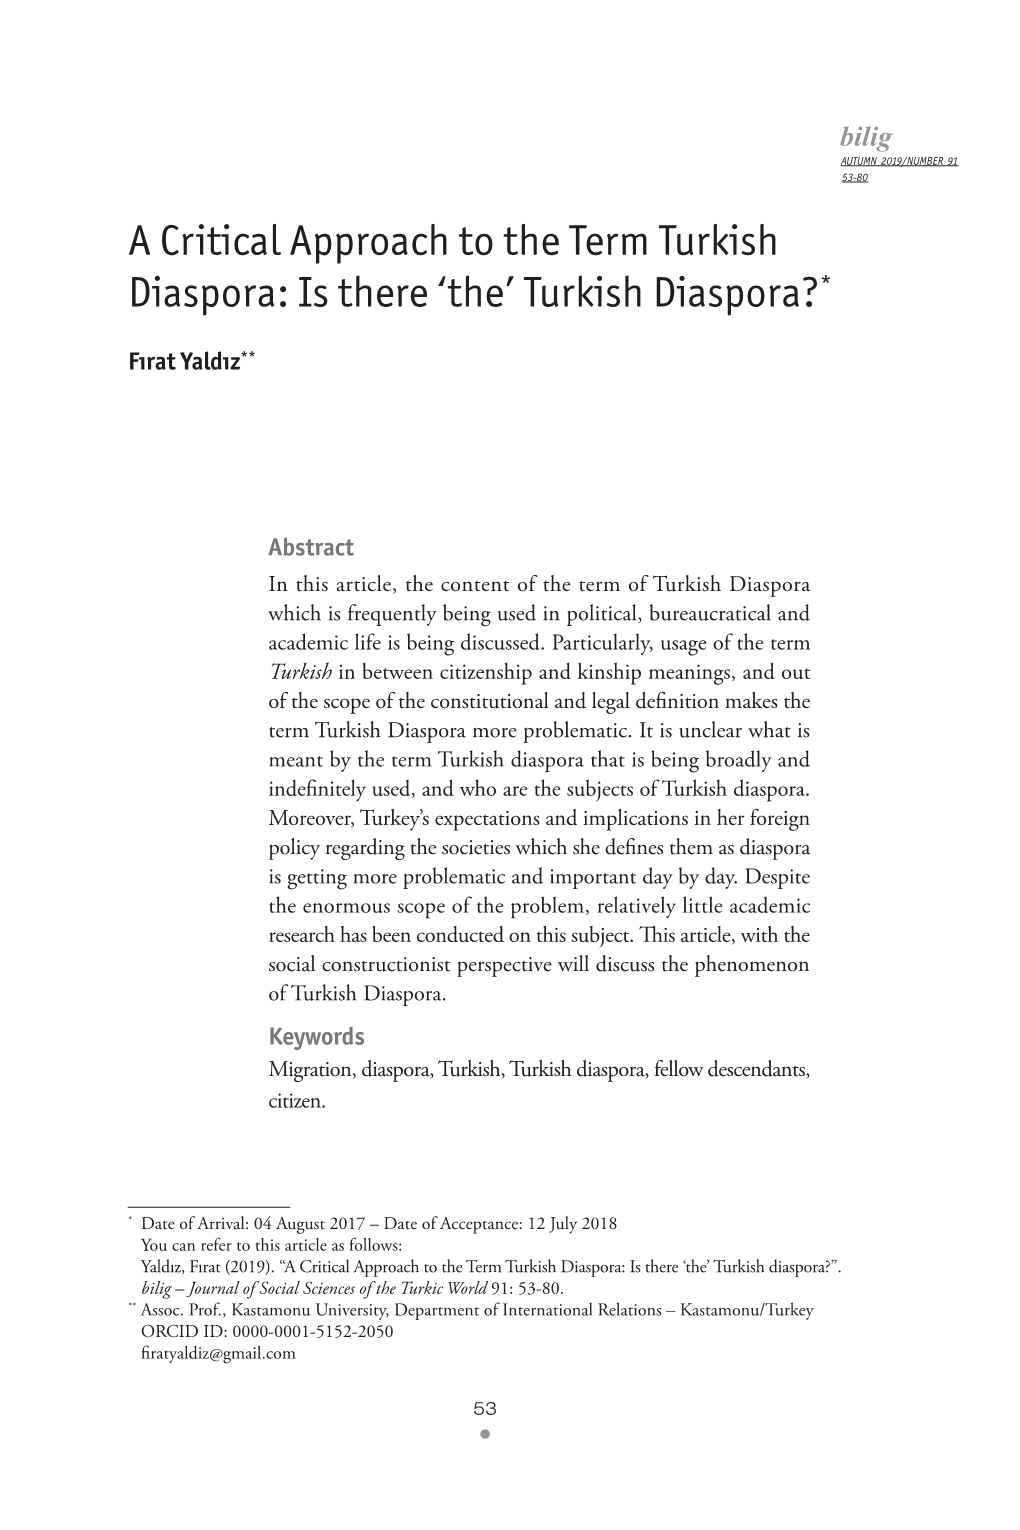 A Critical Approach to the Term Turkish Diaspora: Is There ‘The’ Turkish Diaspora?*